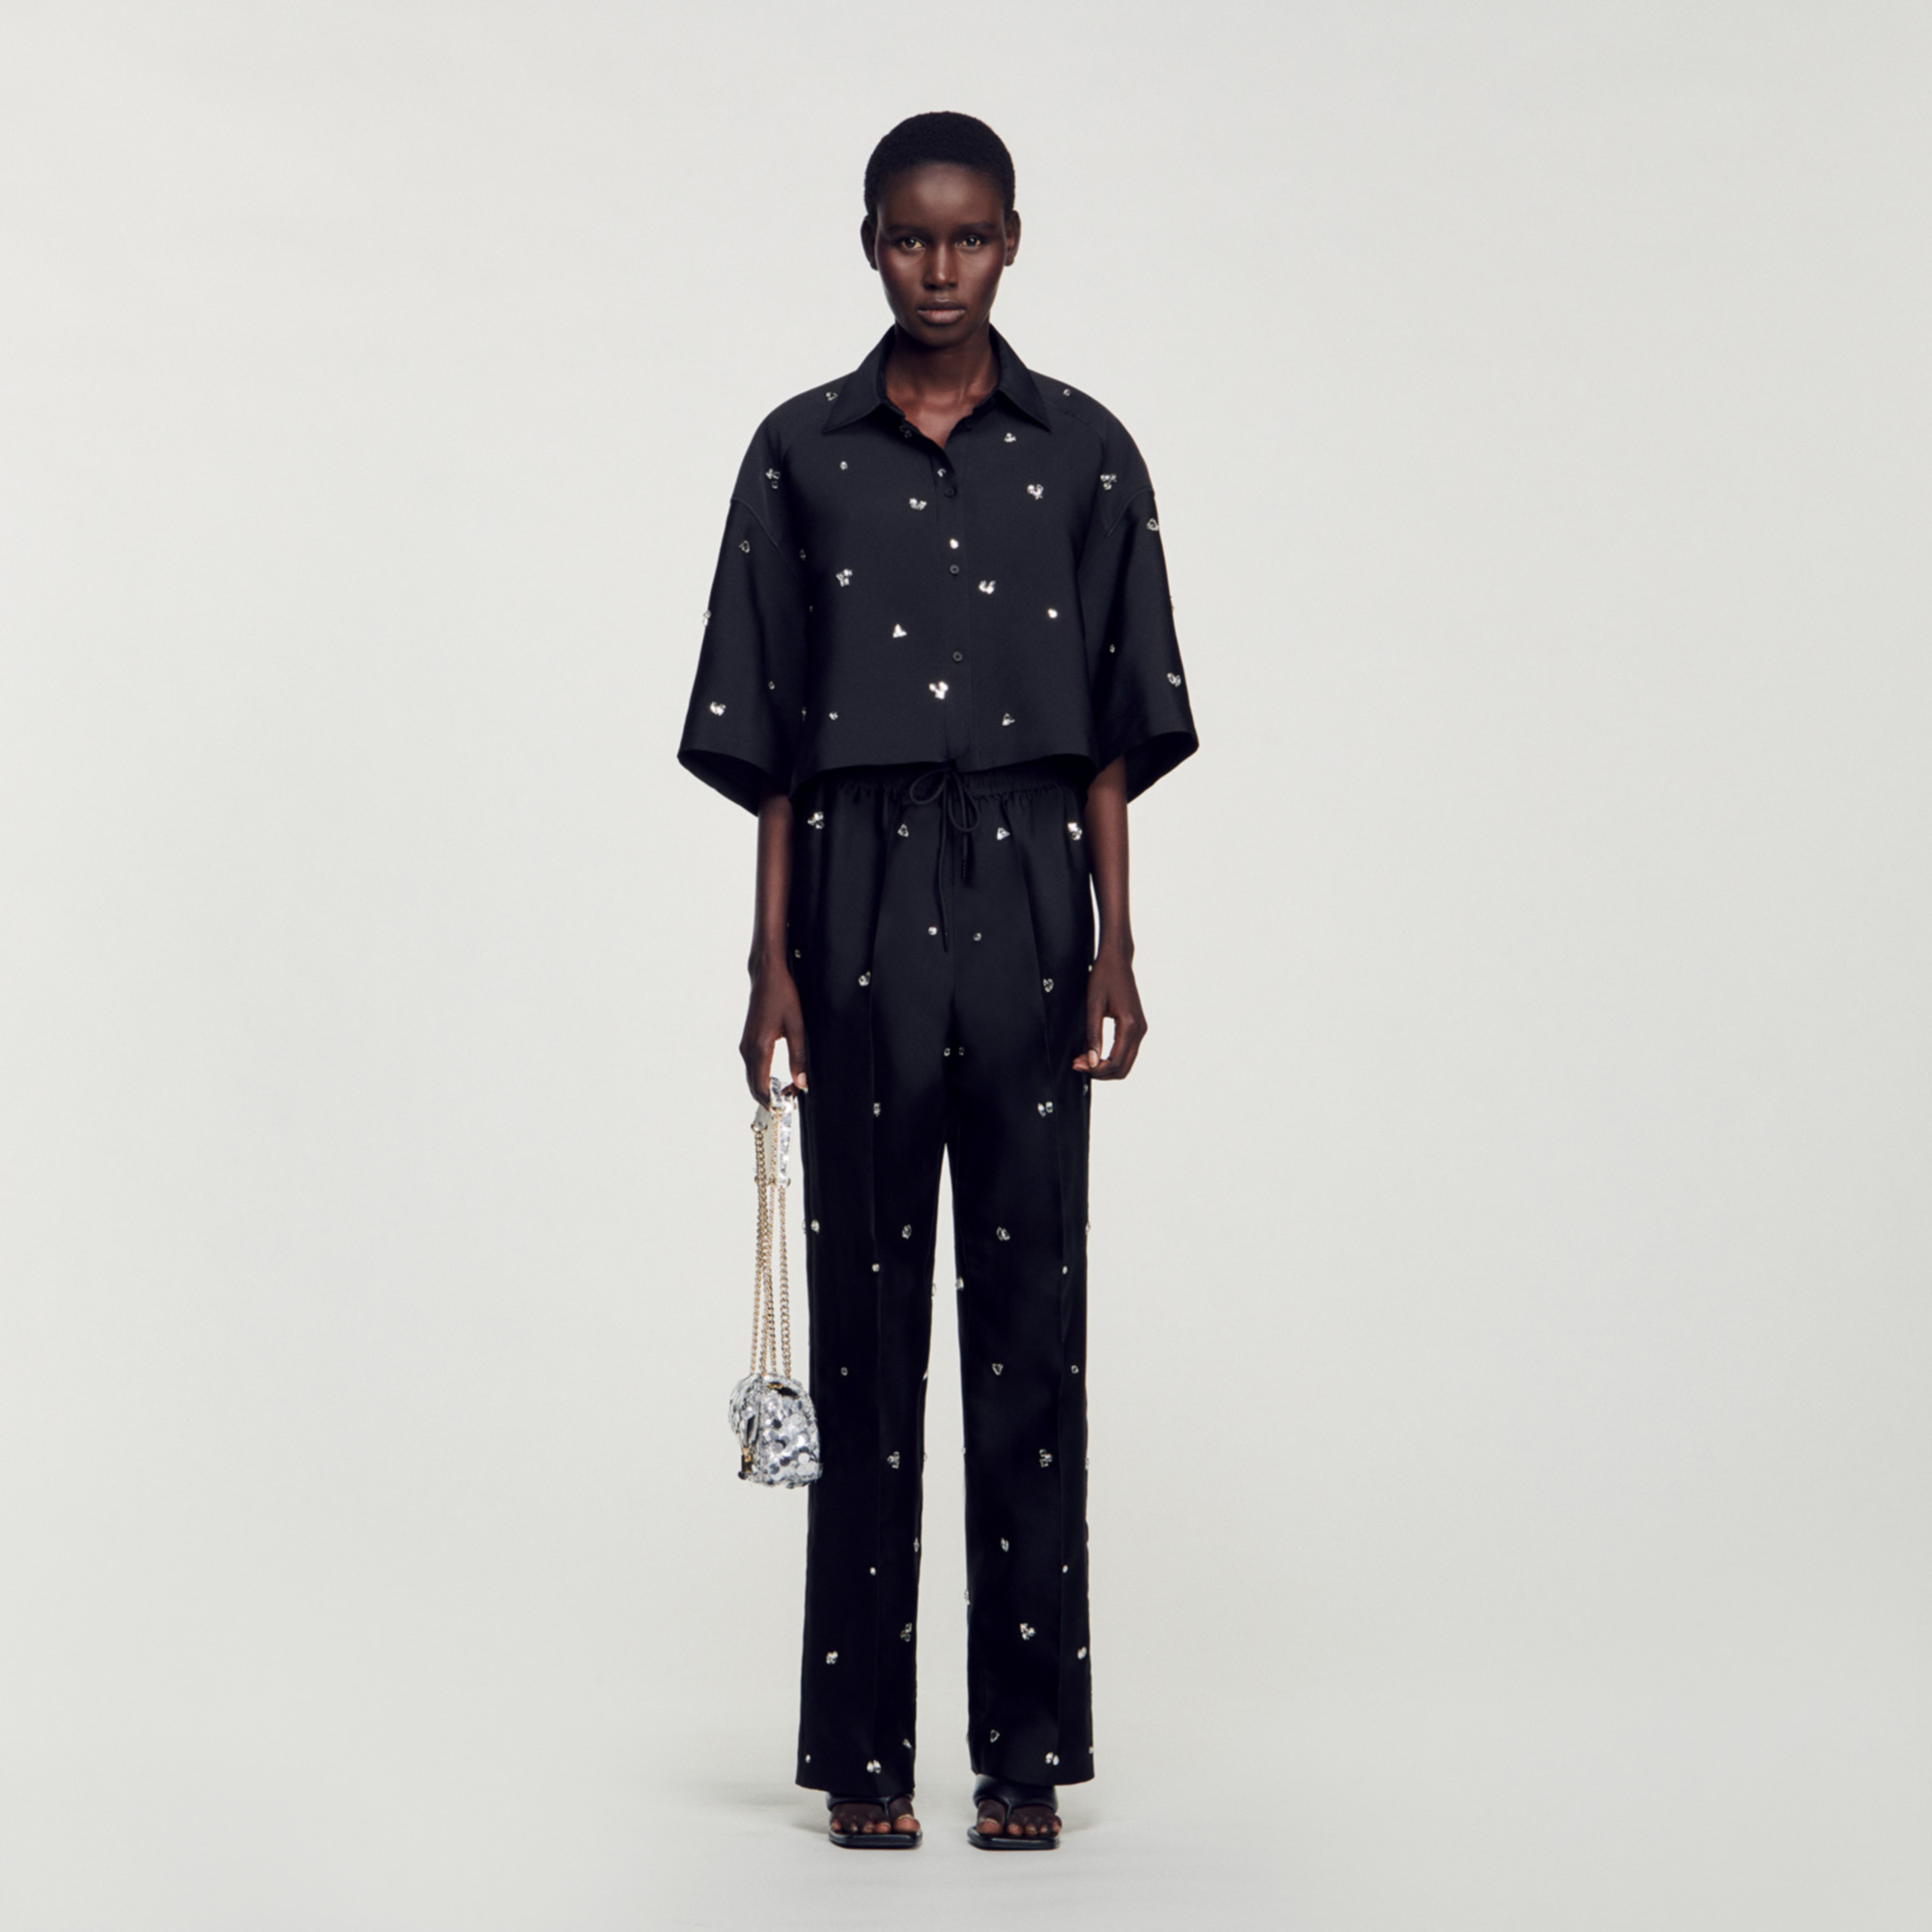 Sandro polyester Oversized cropped shirt with a shirt collar, long sleeves and a button fastening, embellished with rhinestones in an all-over design